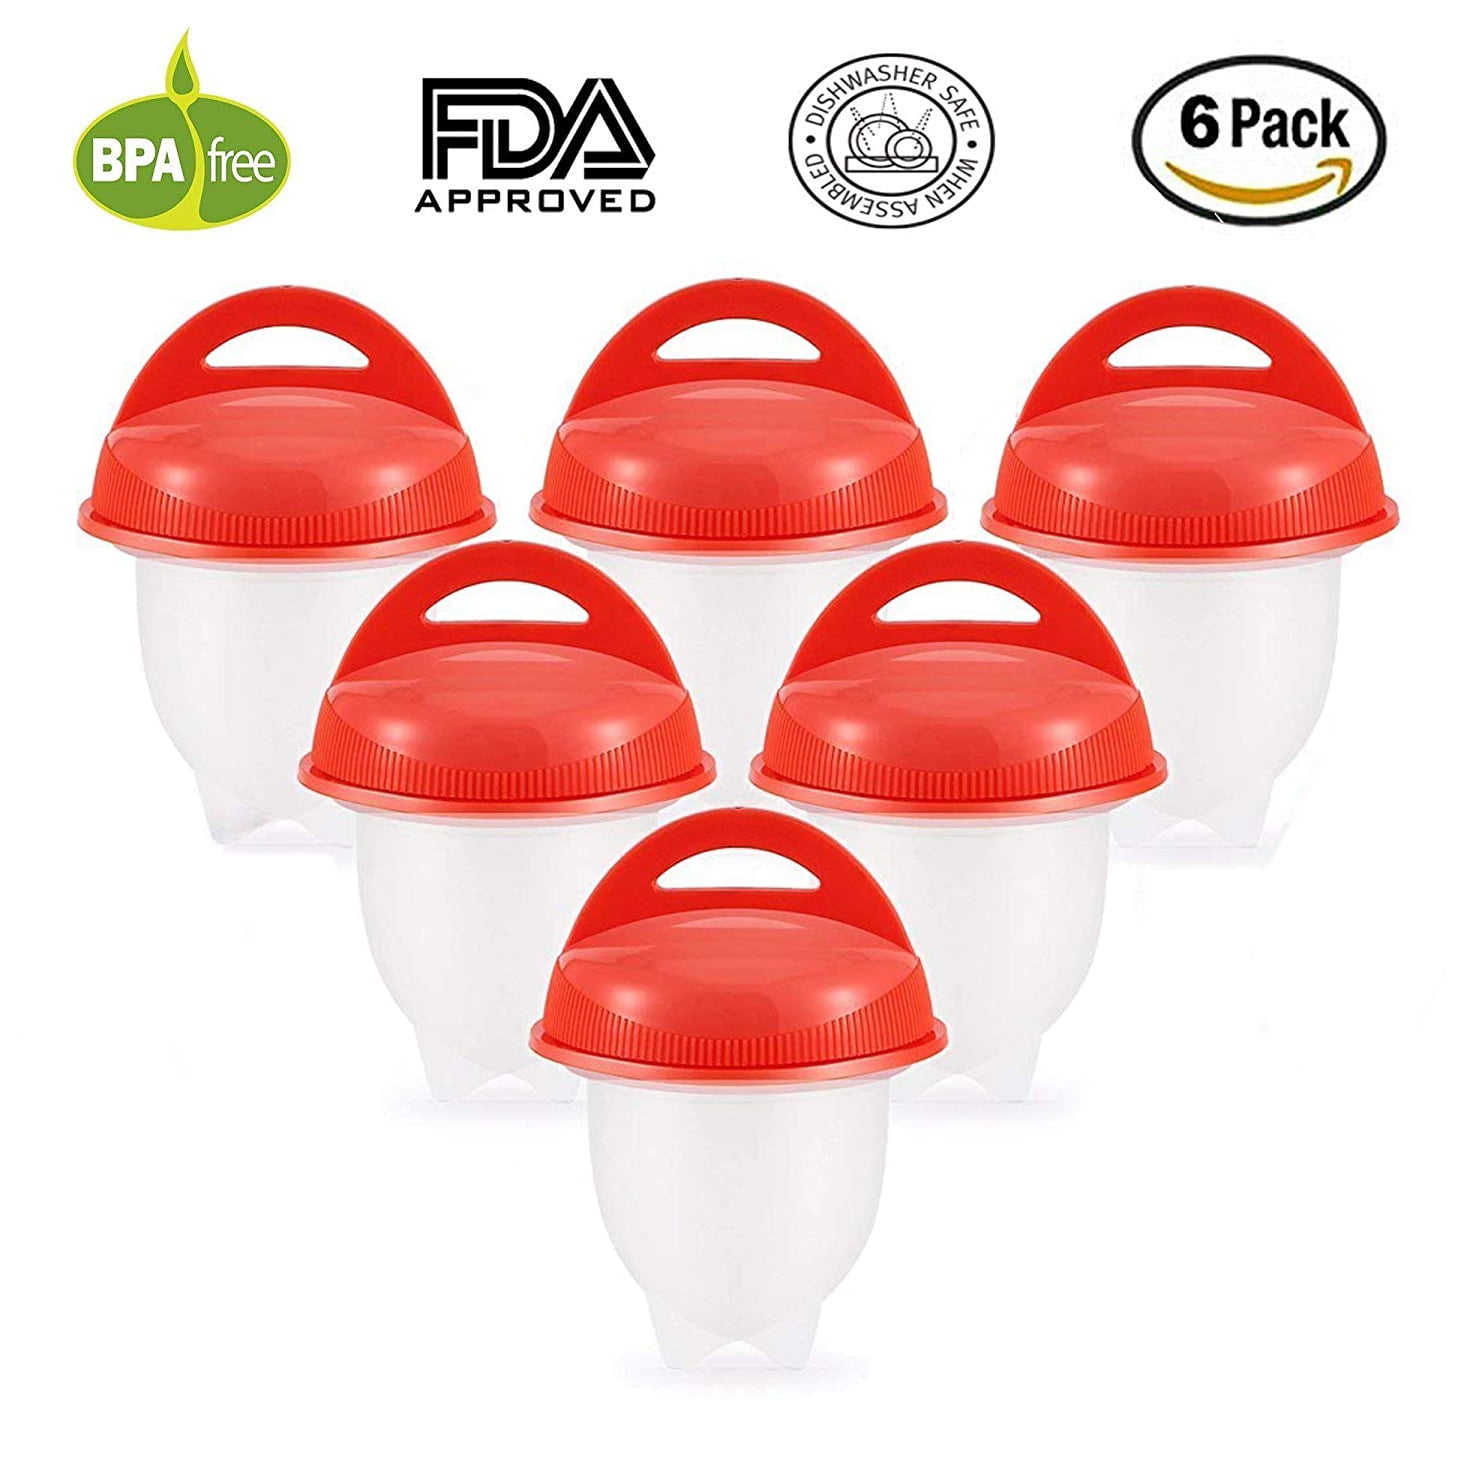 Hard Boil Eggs Cooker Egglettes Pack of 6 Silicone Eggies Divider Without Shell 